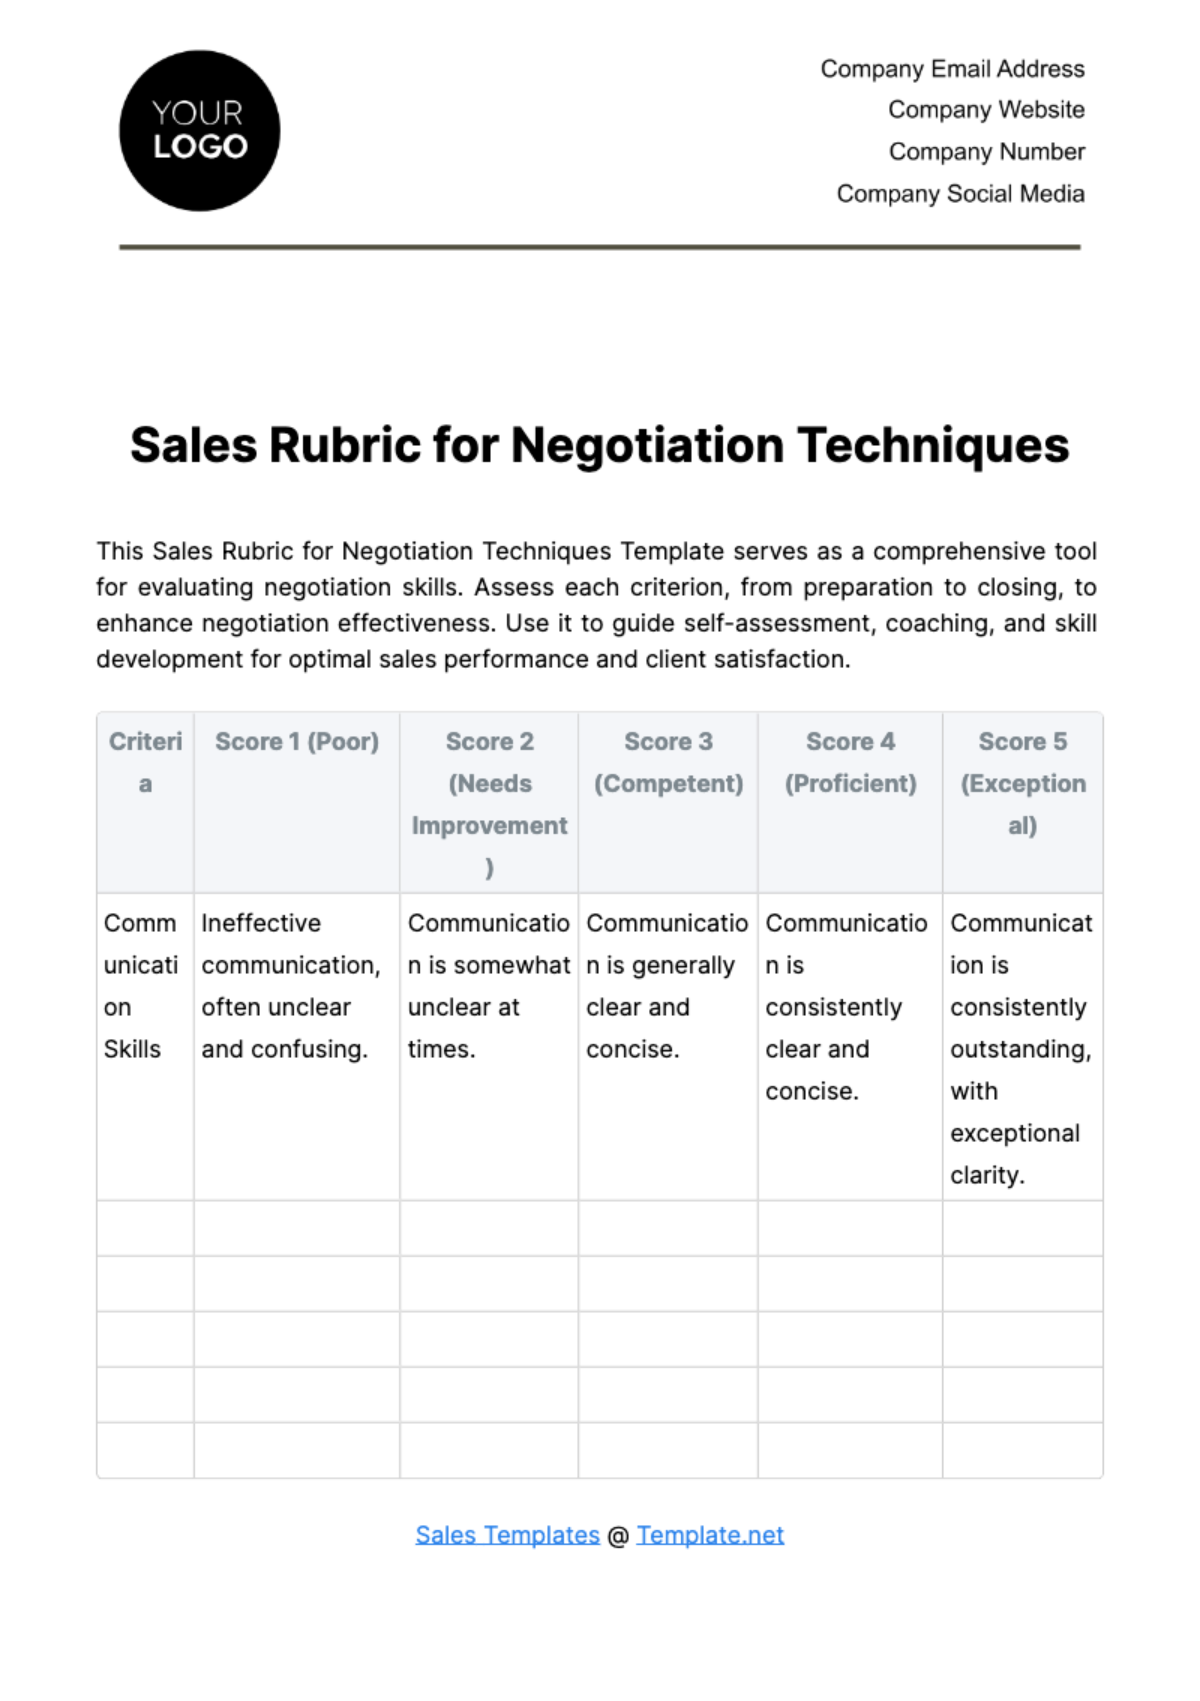 Sales Rubric for Negotiation Techniques Template